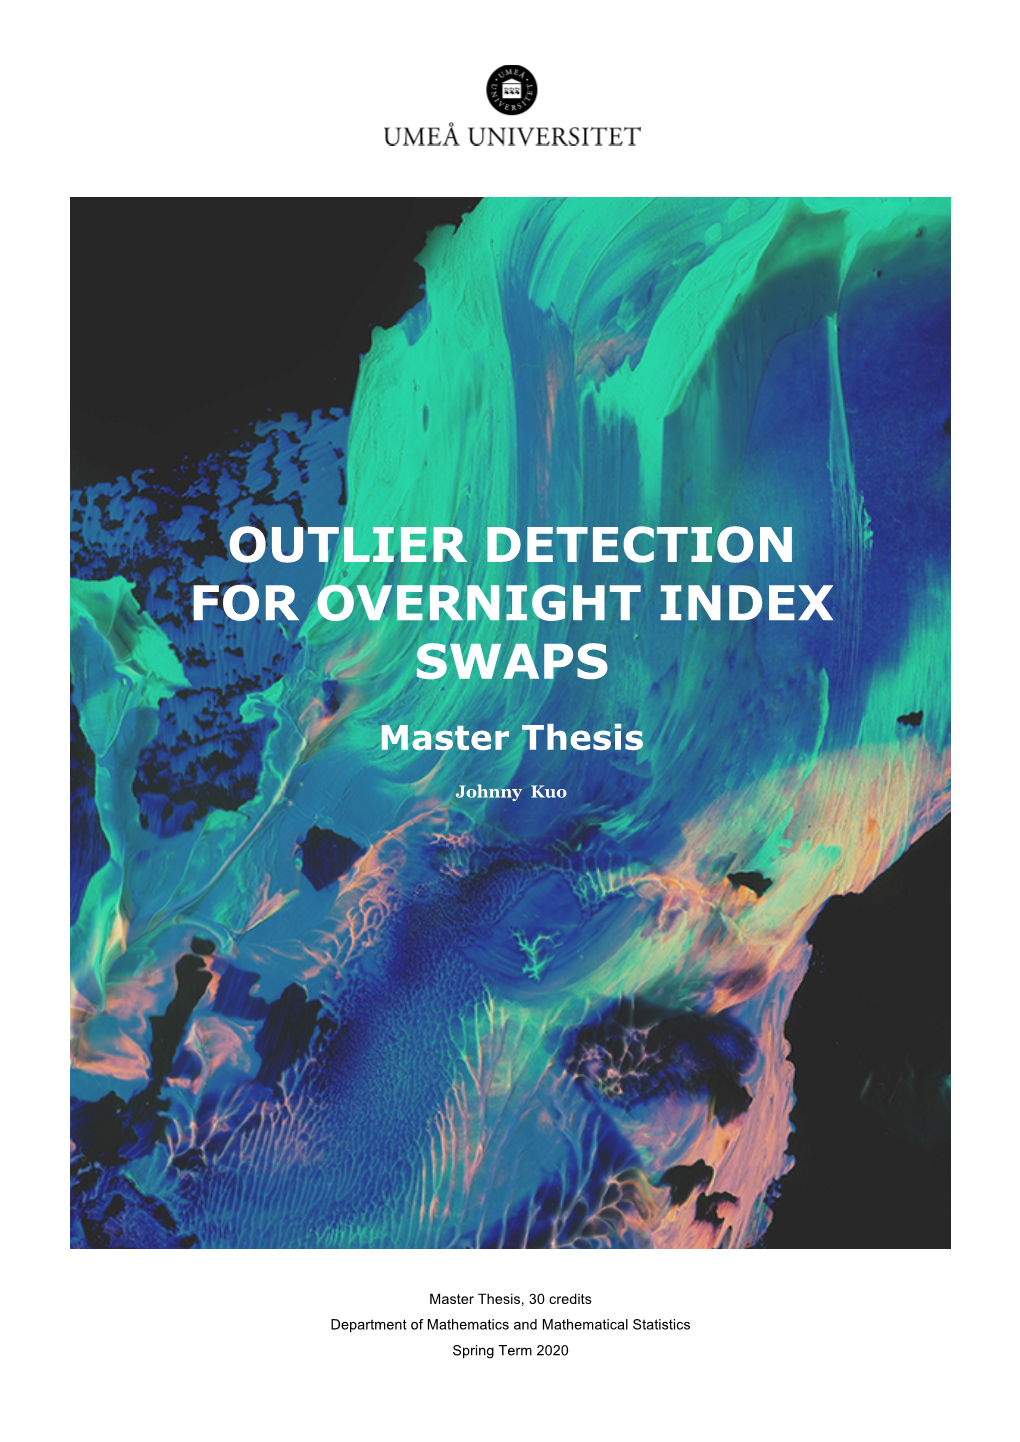 OUTLIER DETECTION for OVERNIGHT INDEX SWAPS Master Thesis